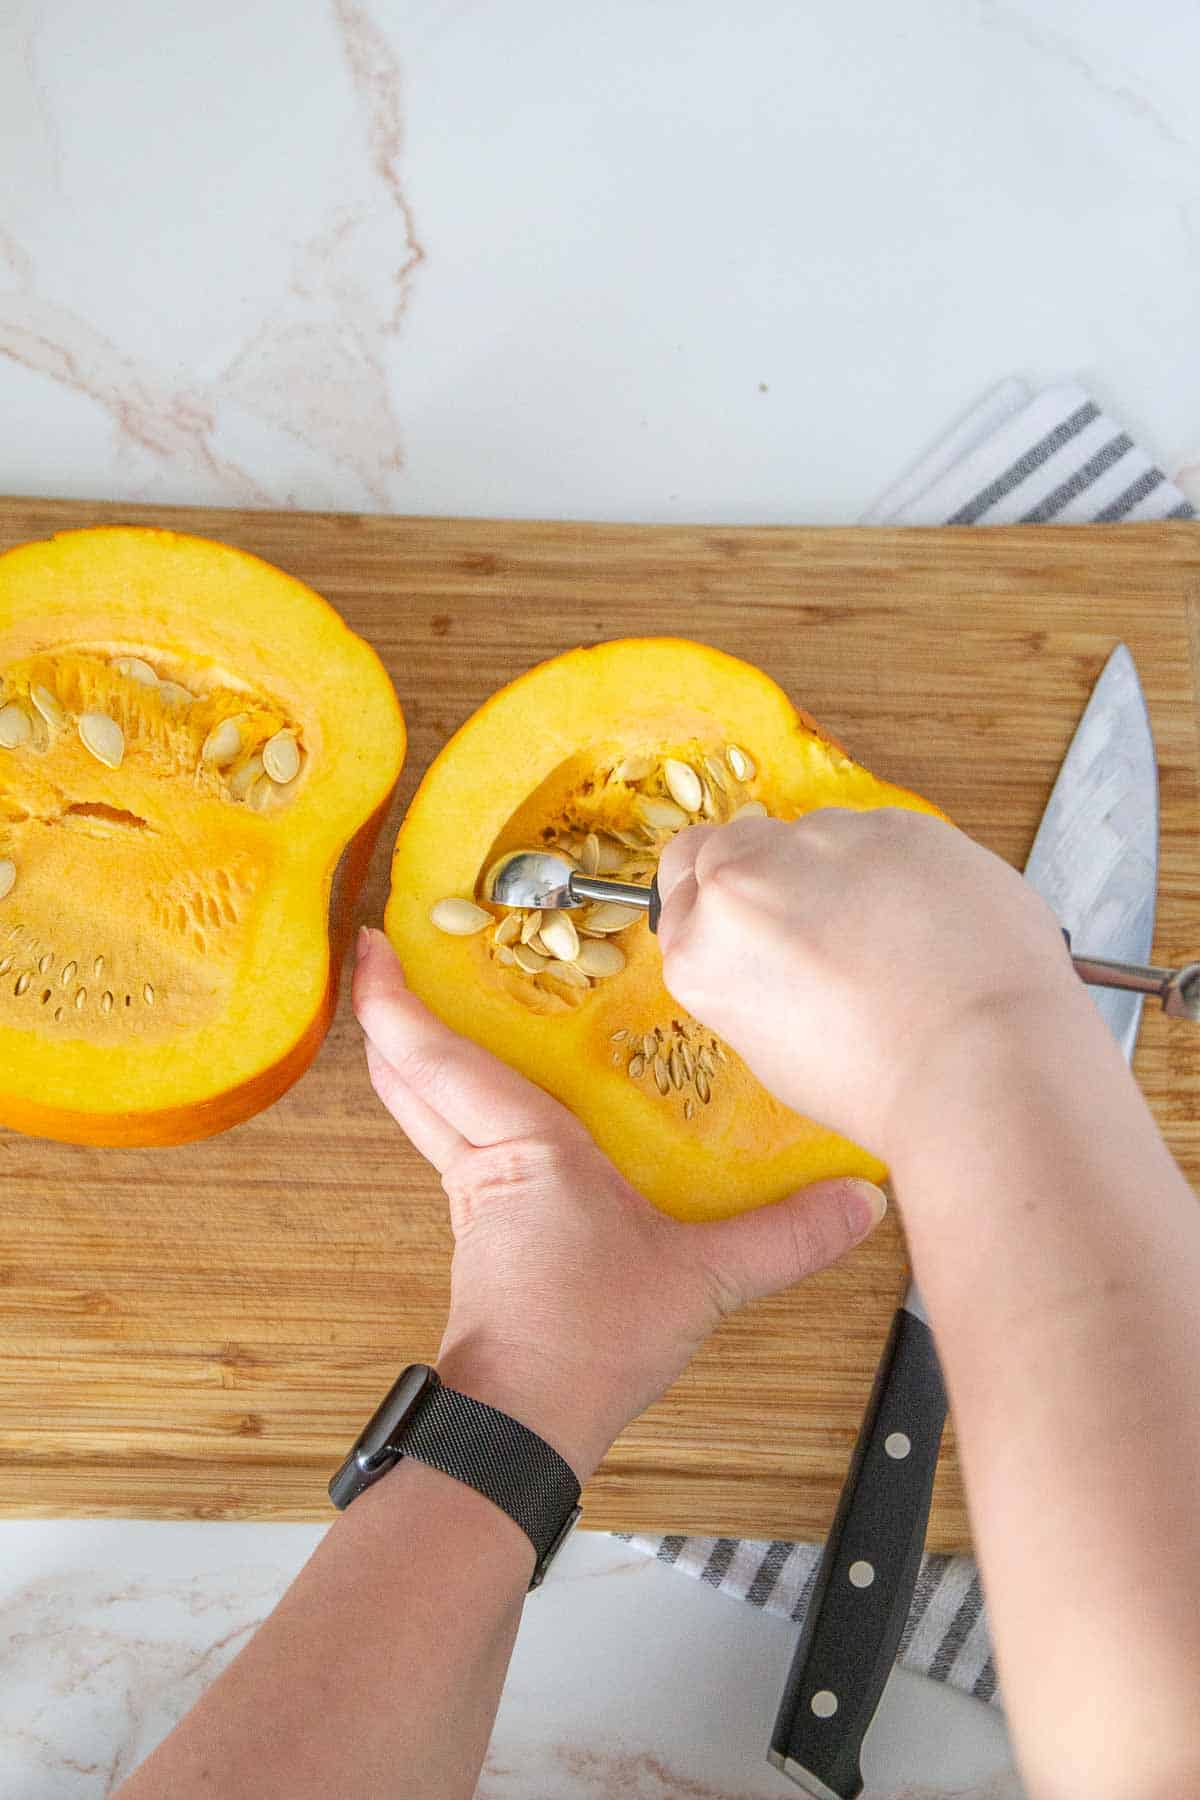 removing seeds from pie pumpkin with melon baller